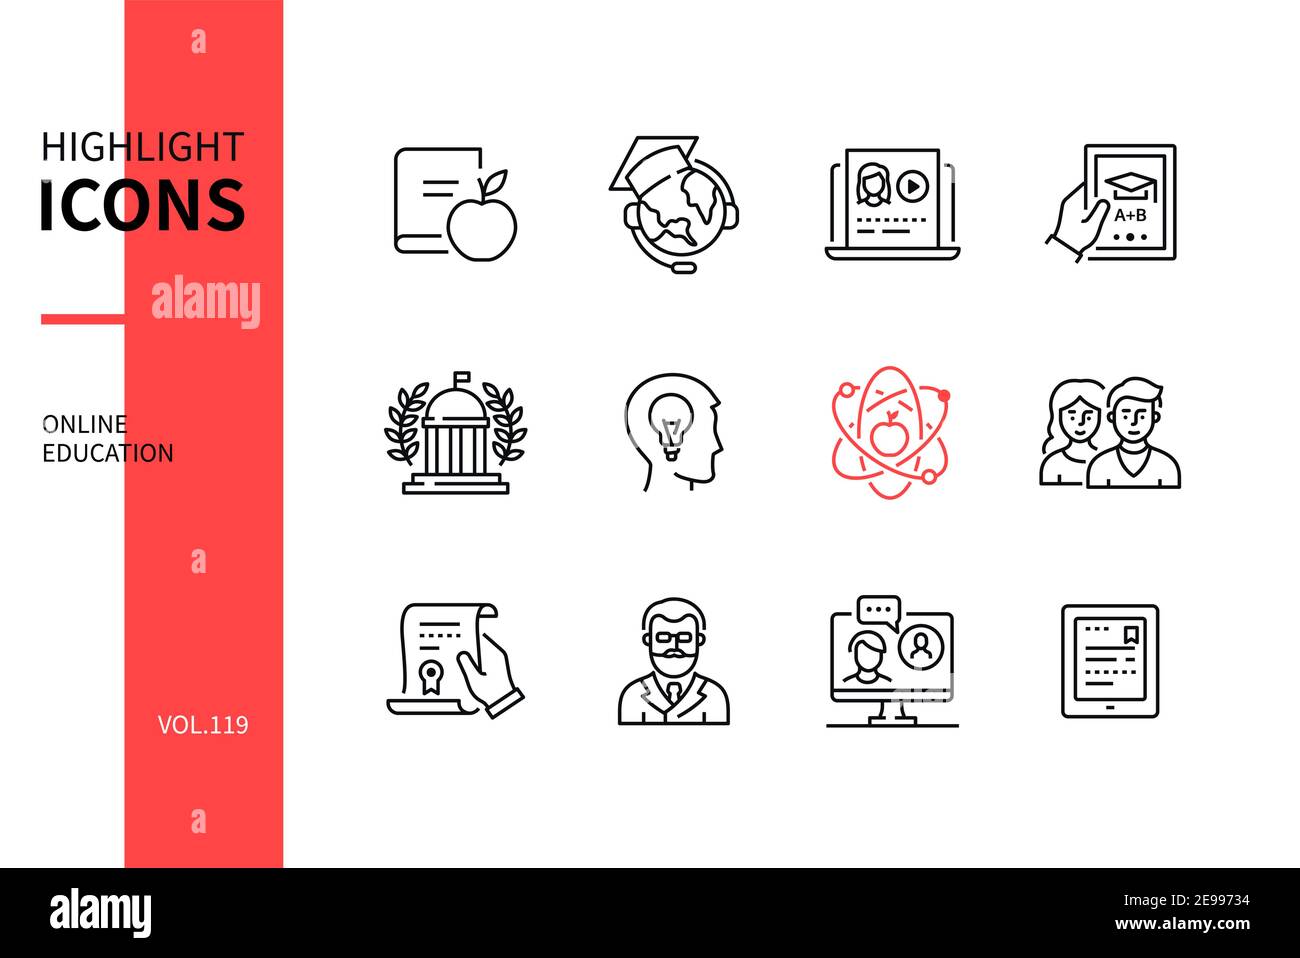 Online education - line design style icons set. E-learning, educational courses idea. Back to school, tutorials, university, ideas, science, students, Stock Vector